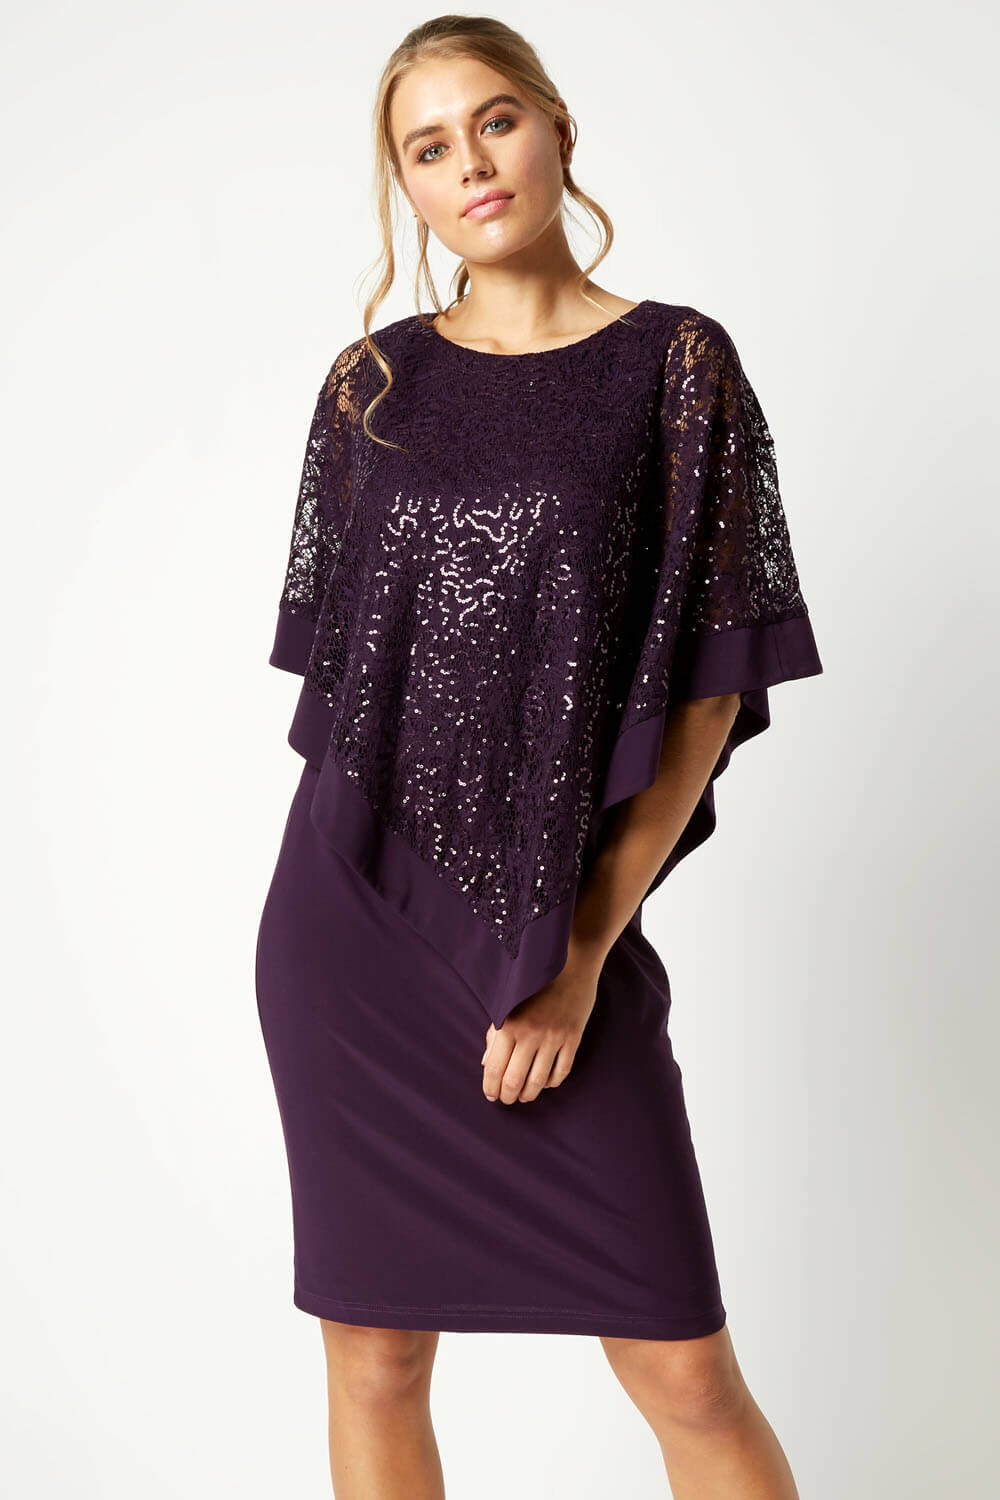 purple dress with black lace overlay